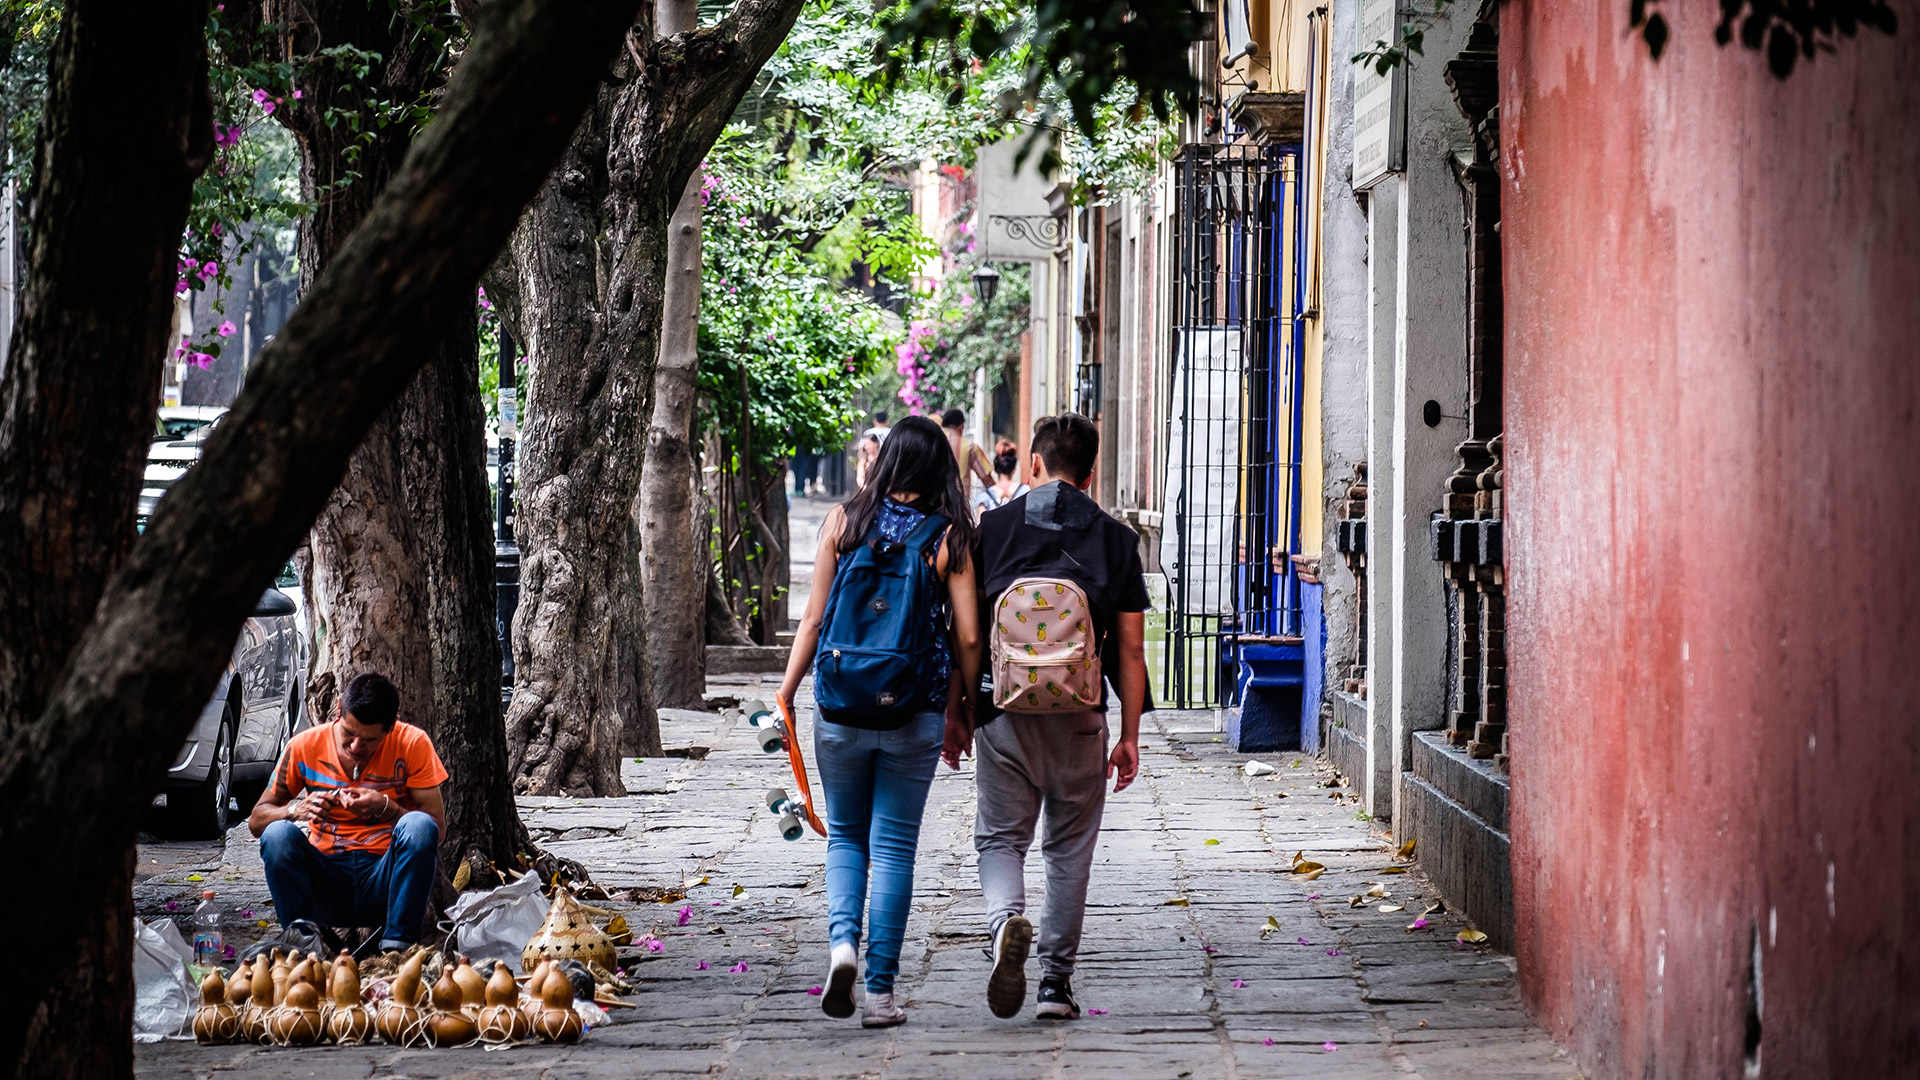 A couple walks down a street in Mexico City.